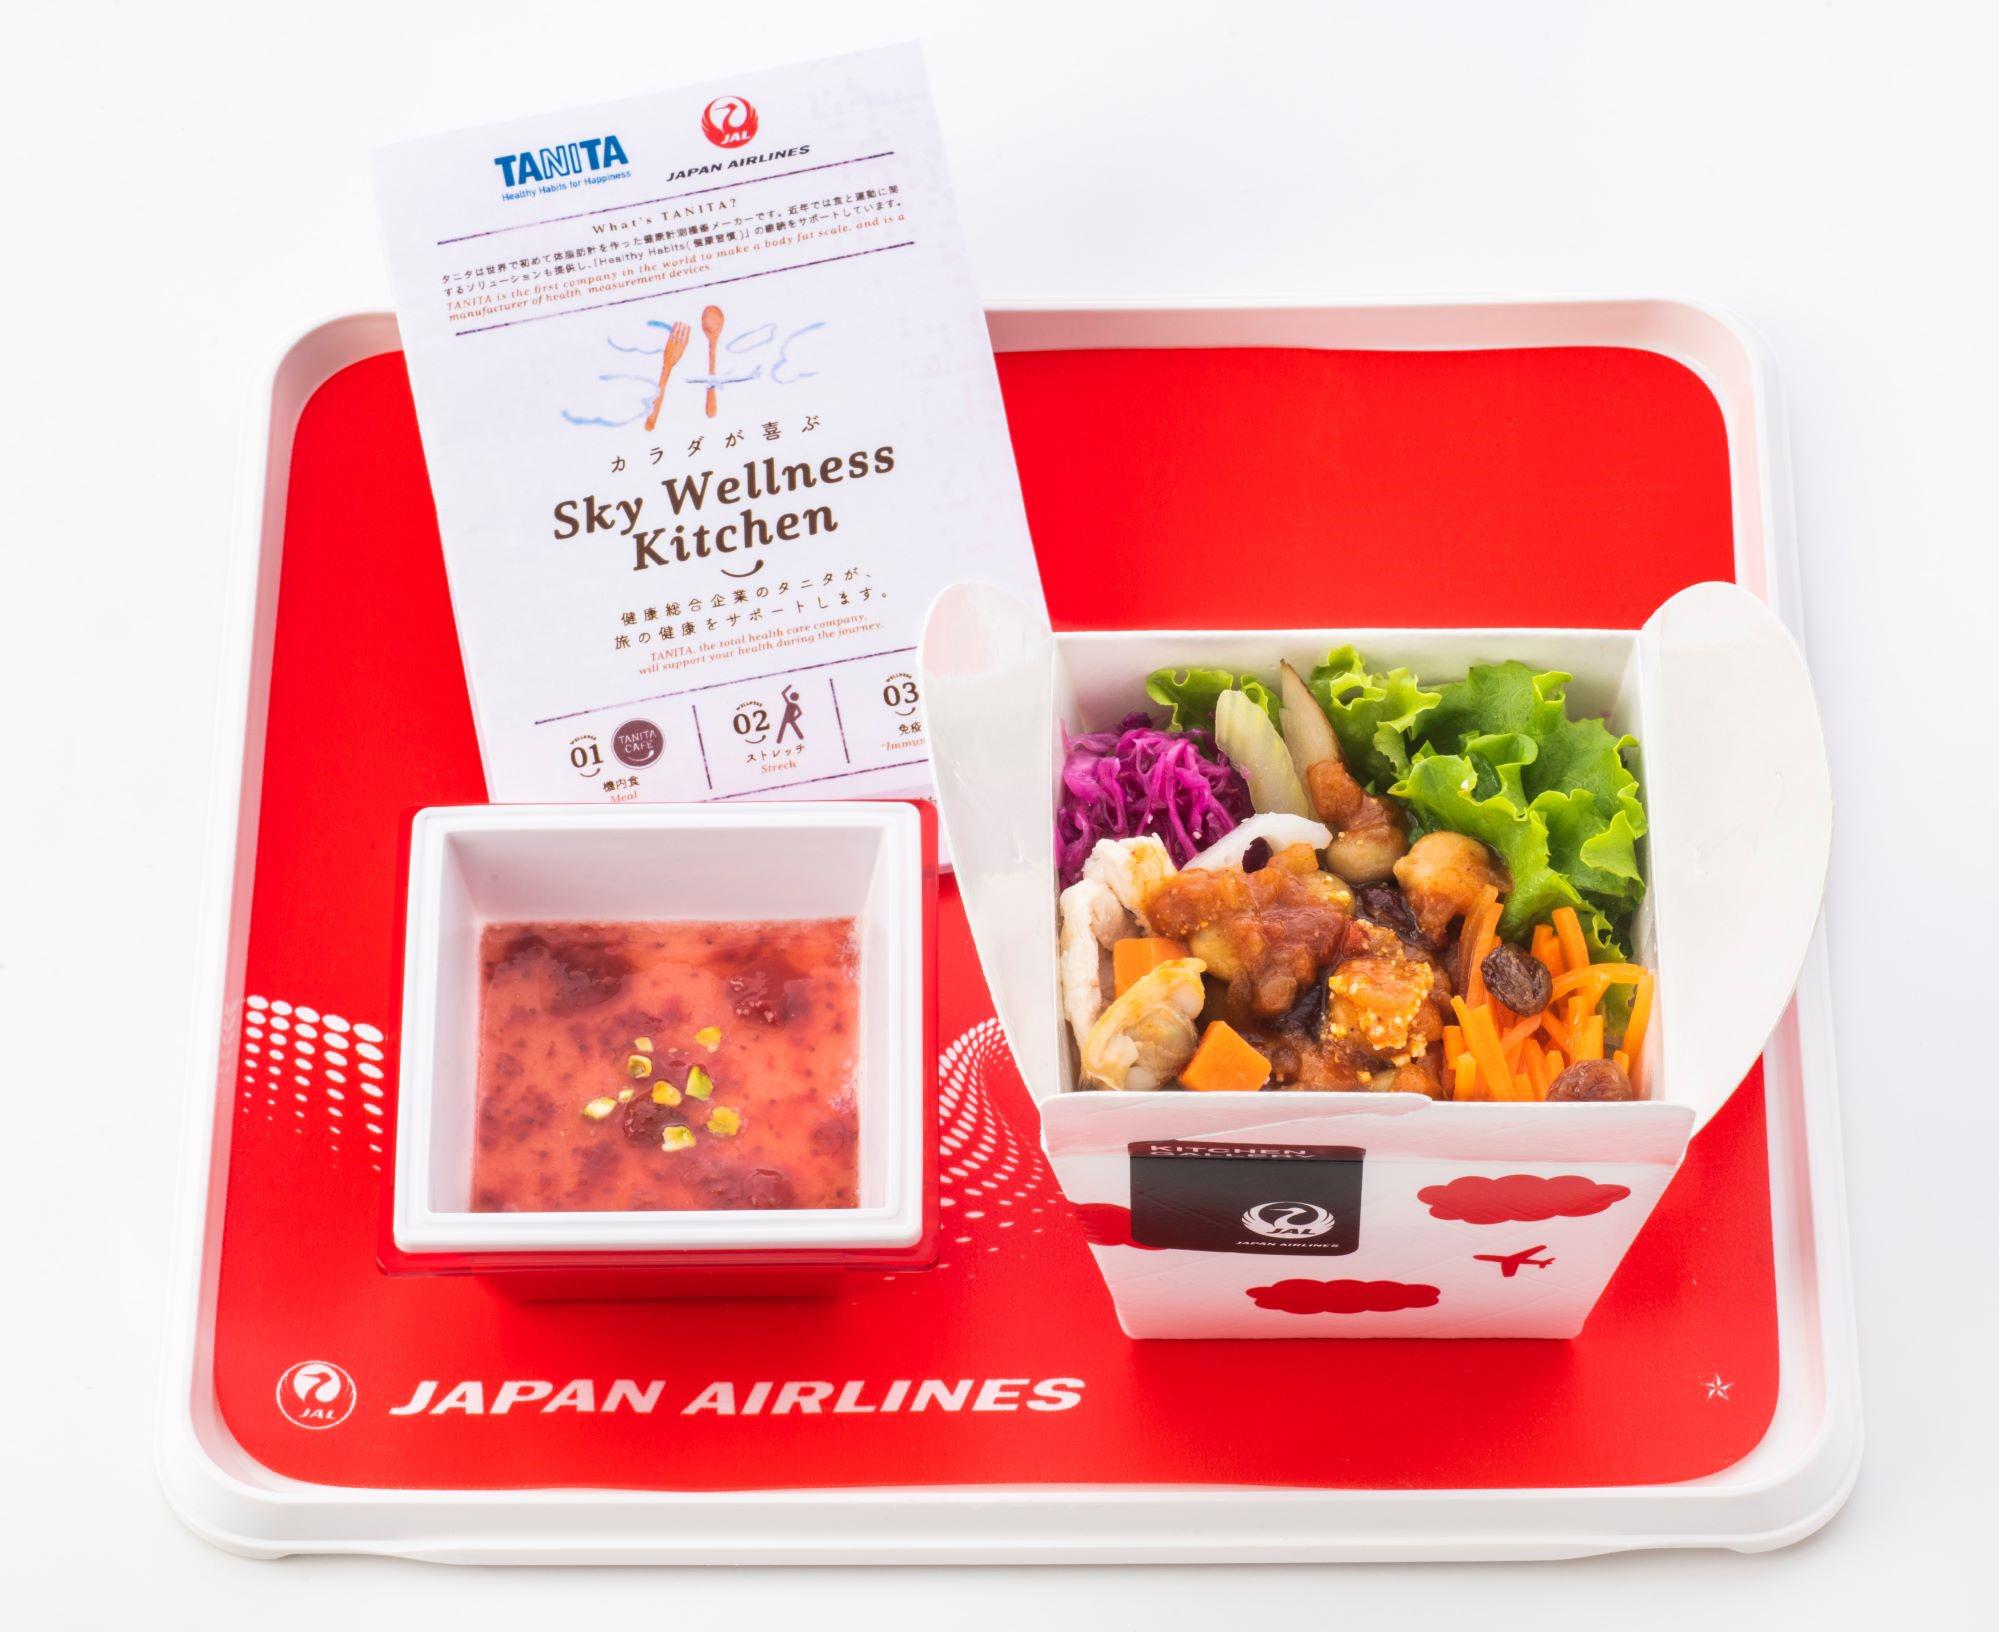 Japan Airlines introduce�s �Sky Wellness Kitchen� with TANITA Cafe